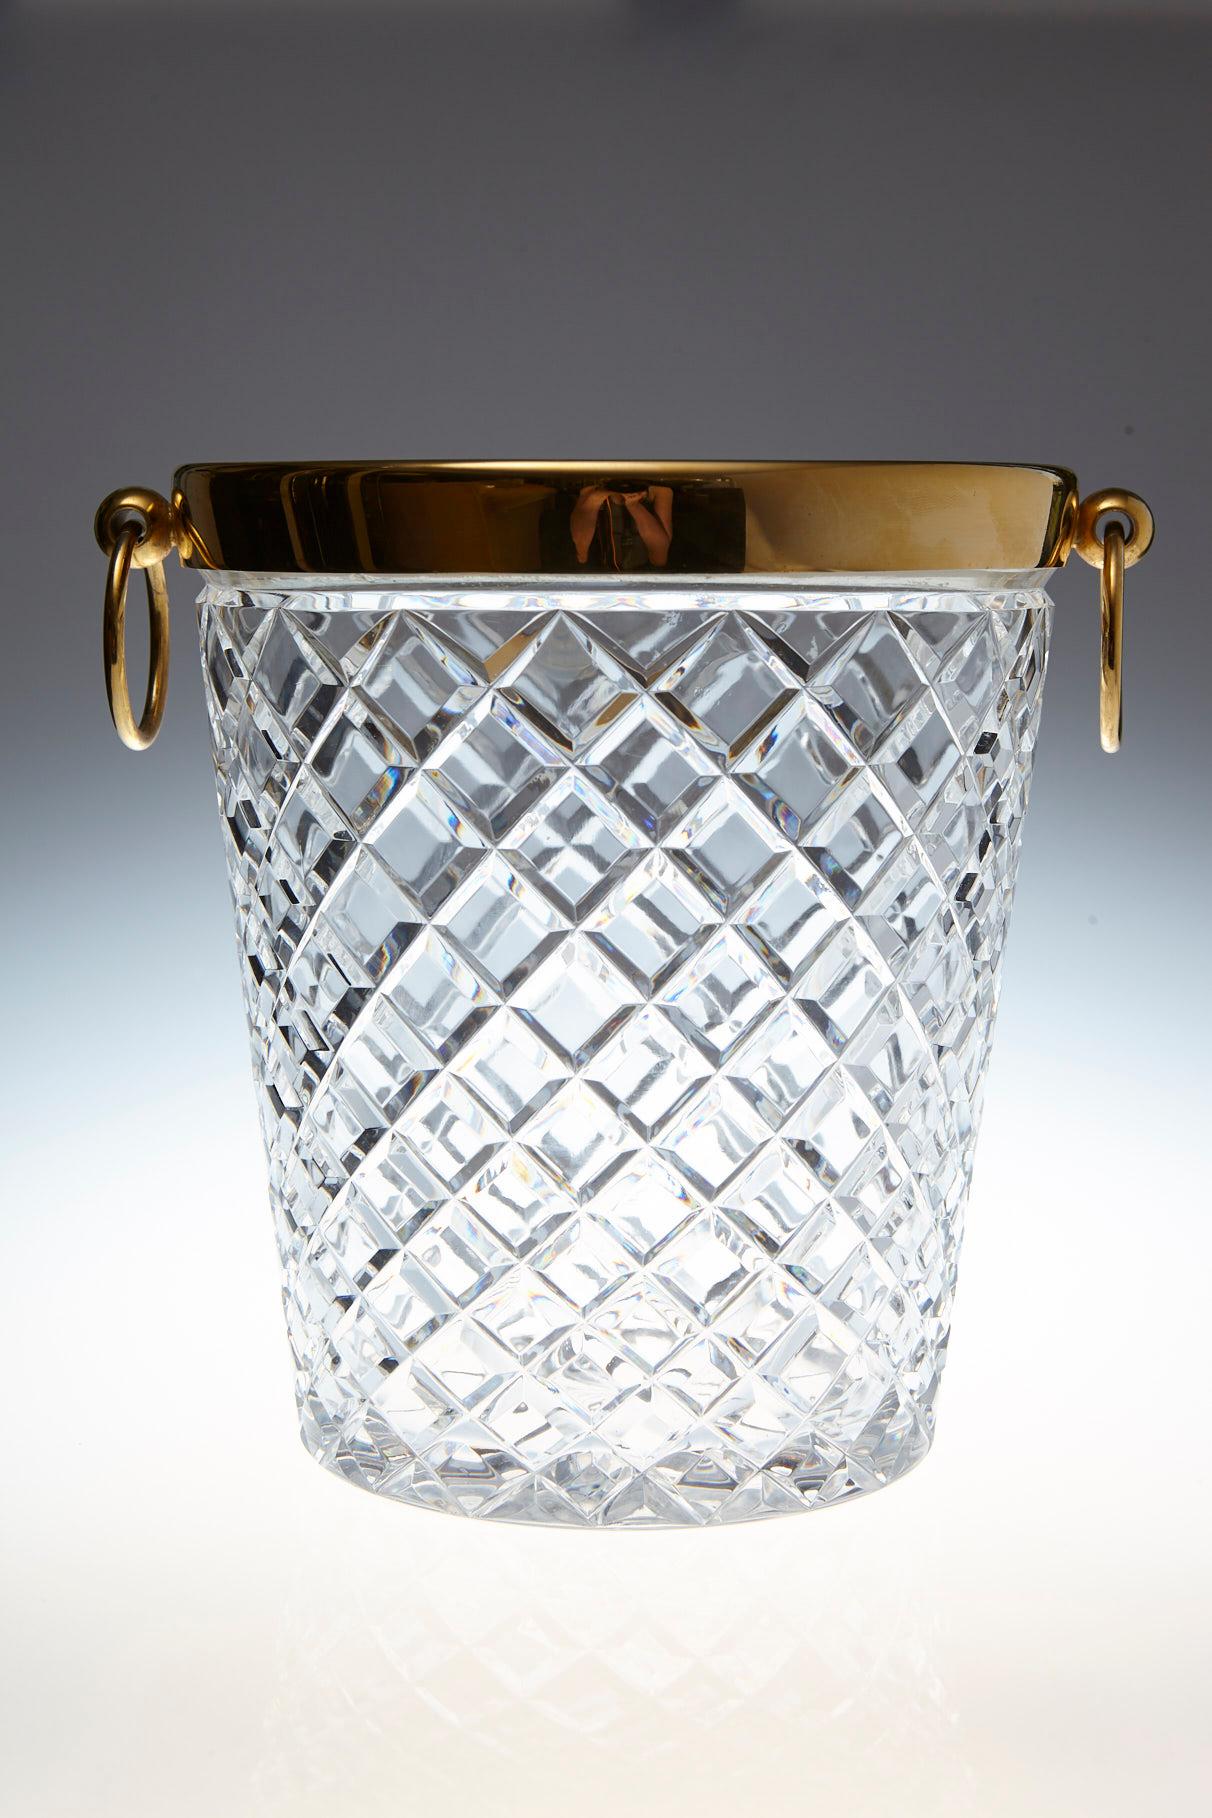 Impressive Belgian crystal and brass-plated ice bucket with diamond cuts and drop ring pulls.
The ice bucket was purchased at the then famous Saks Fifth Avenue 'Guest and Gift Shop' and has it's original sticker.
The ice bucket and specially the